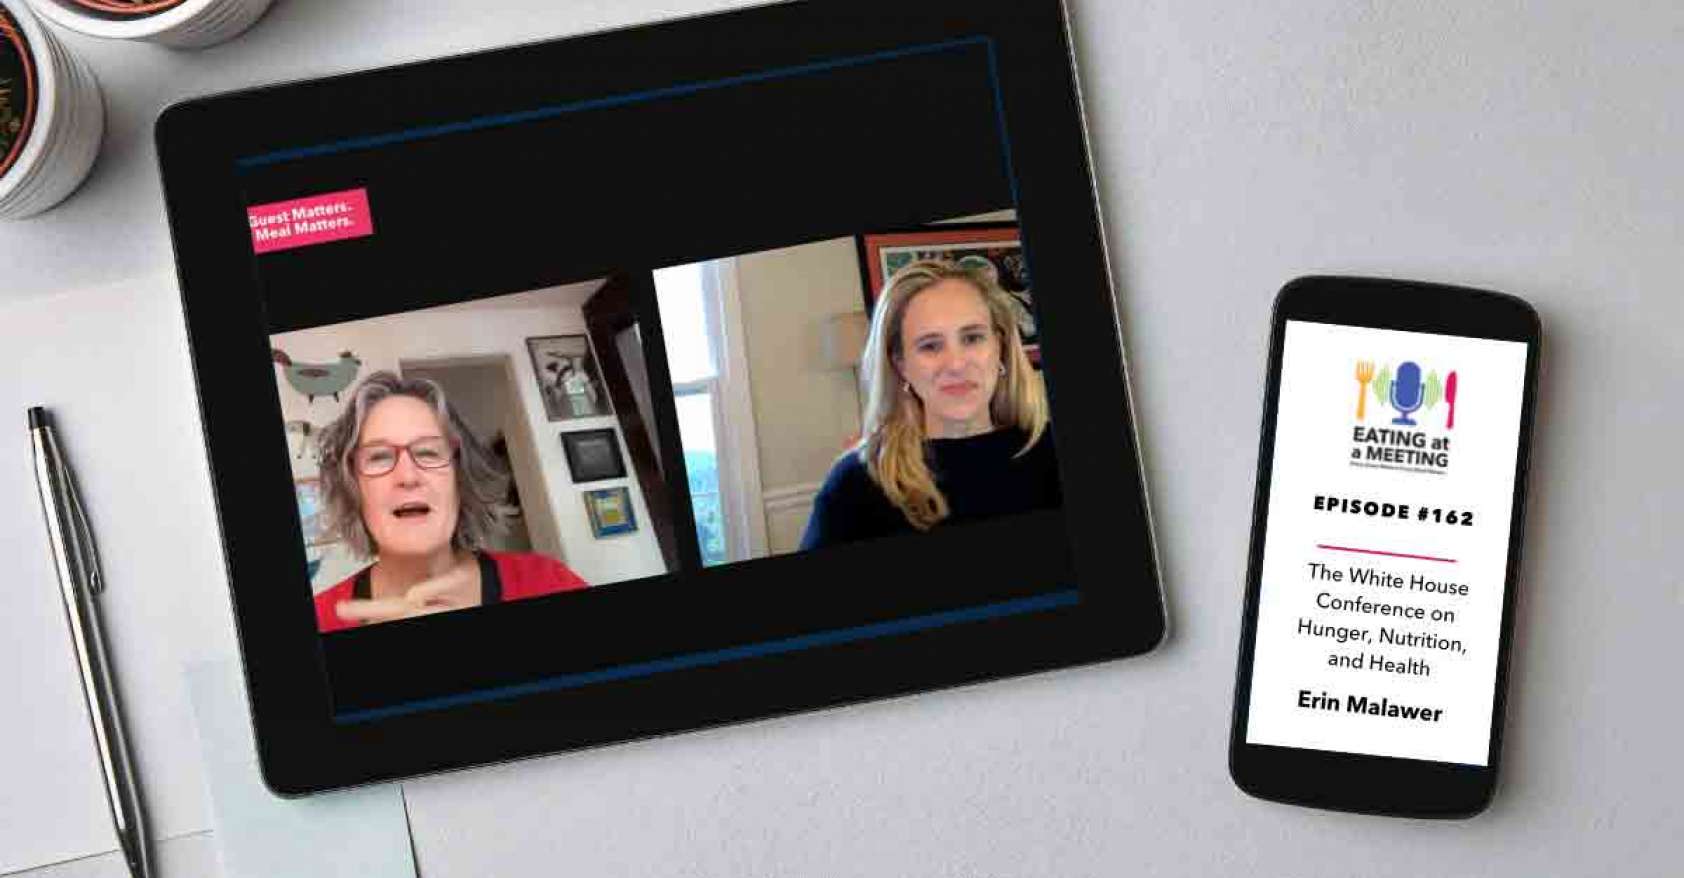 An iPad and iPhone on a table. On the iPad is a picture of two men who are on video screen. On the iPhone is the Eating at a Meeting podcast logo with Episode #163 The White House Conference on Hunger, Nutrition, and Health with Erin Malawer of Allergy Strong